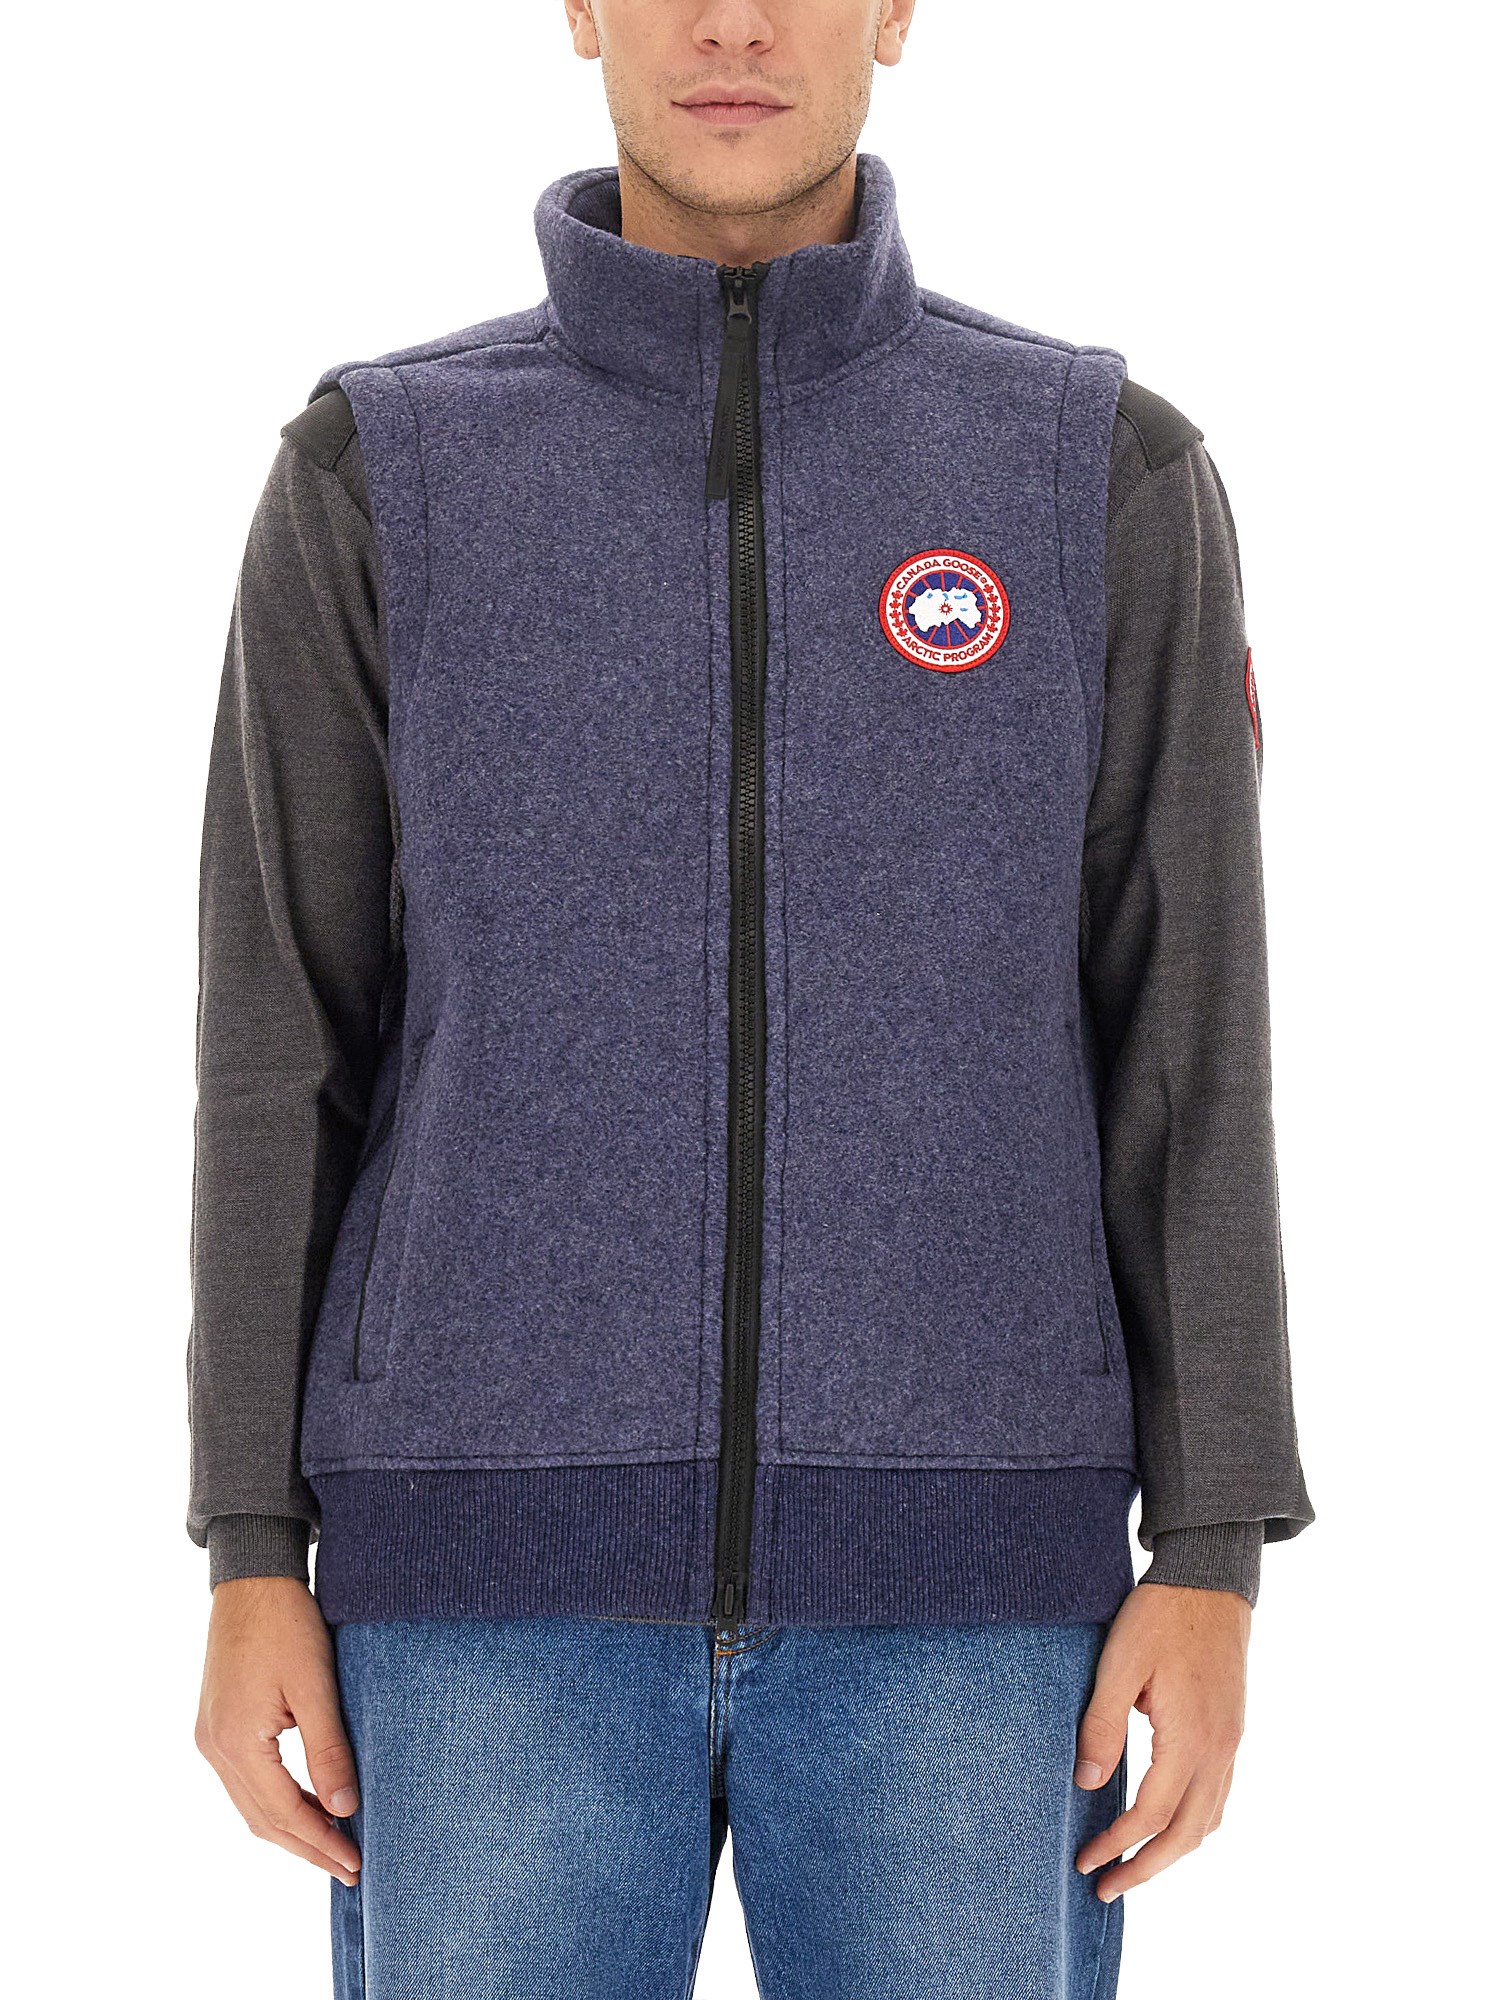 canada goose vests with logo